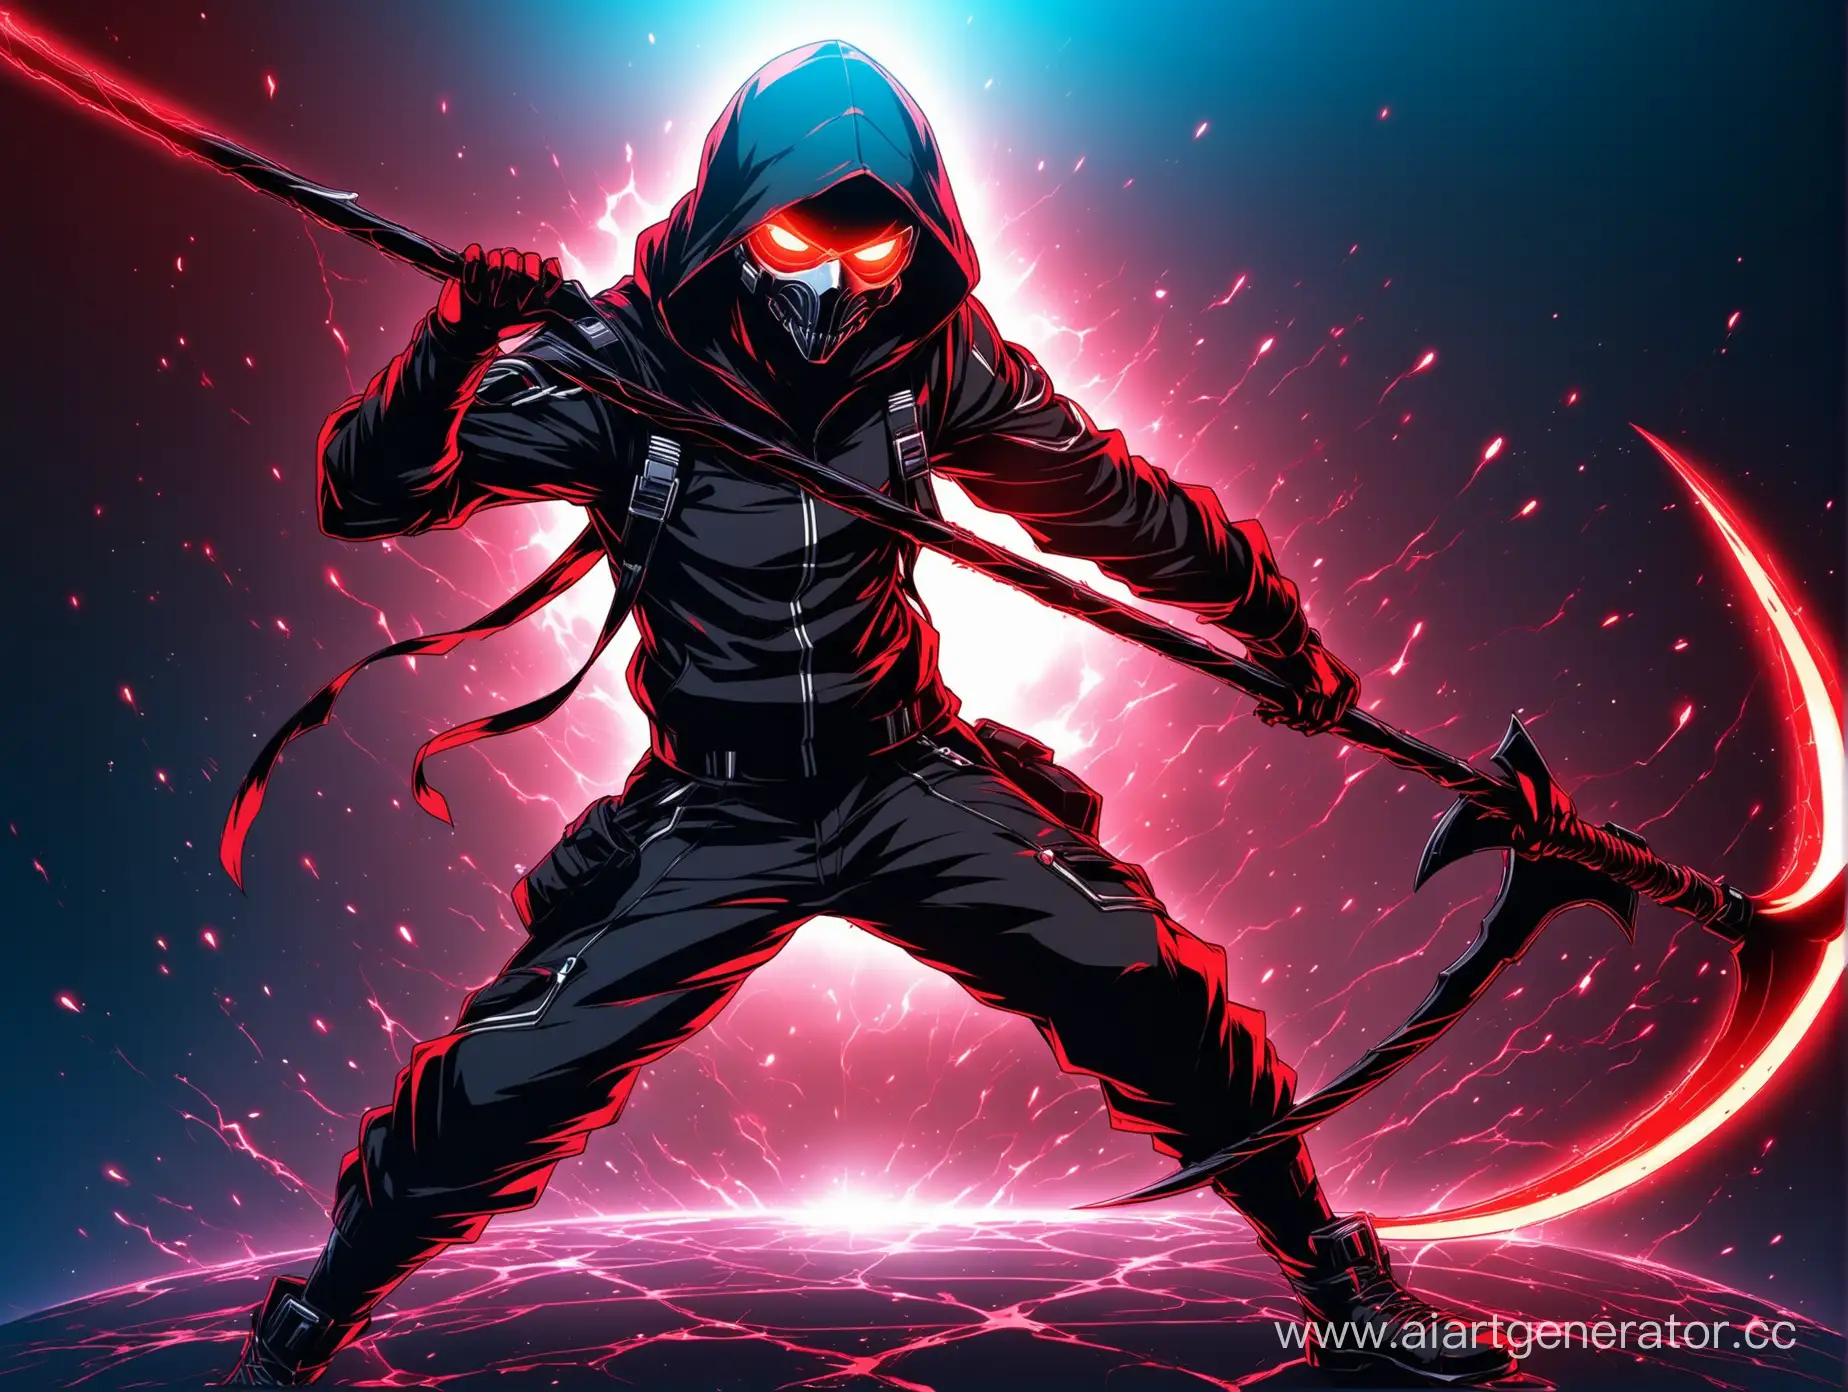 Futuristic-Grim-Reaper-with-SciFi-Style-Attire-and-Glowing-Red-Eyes